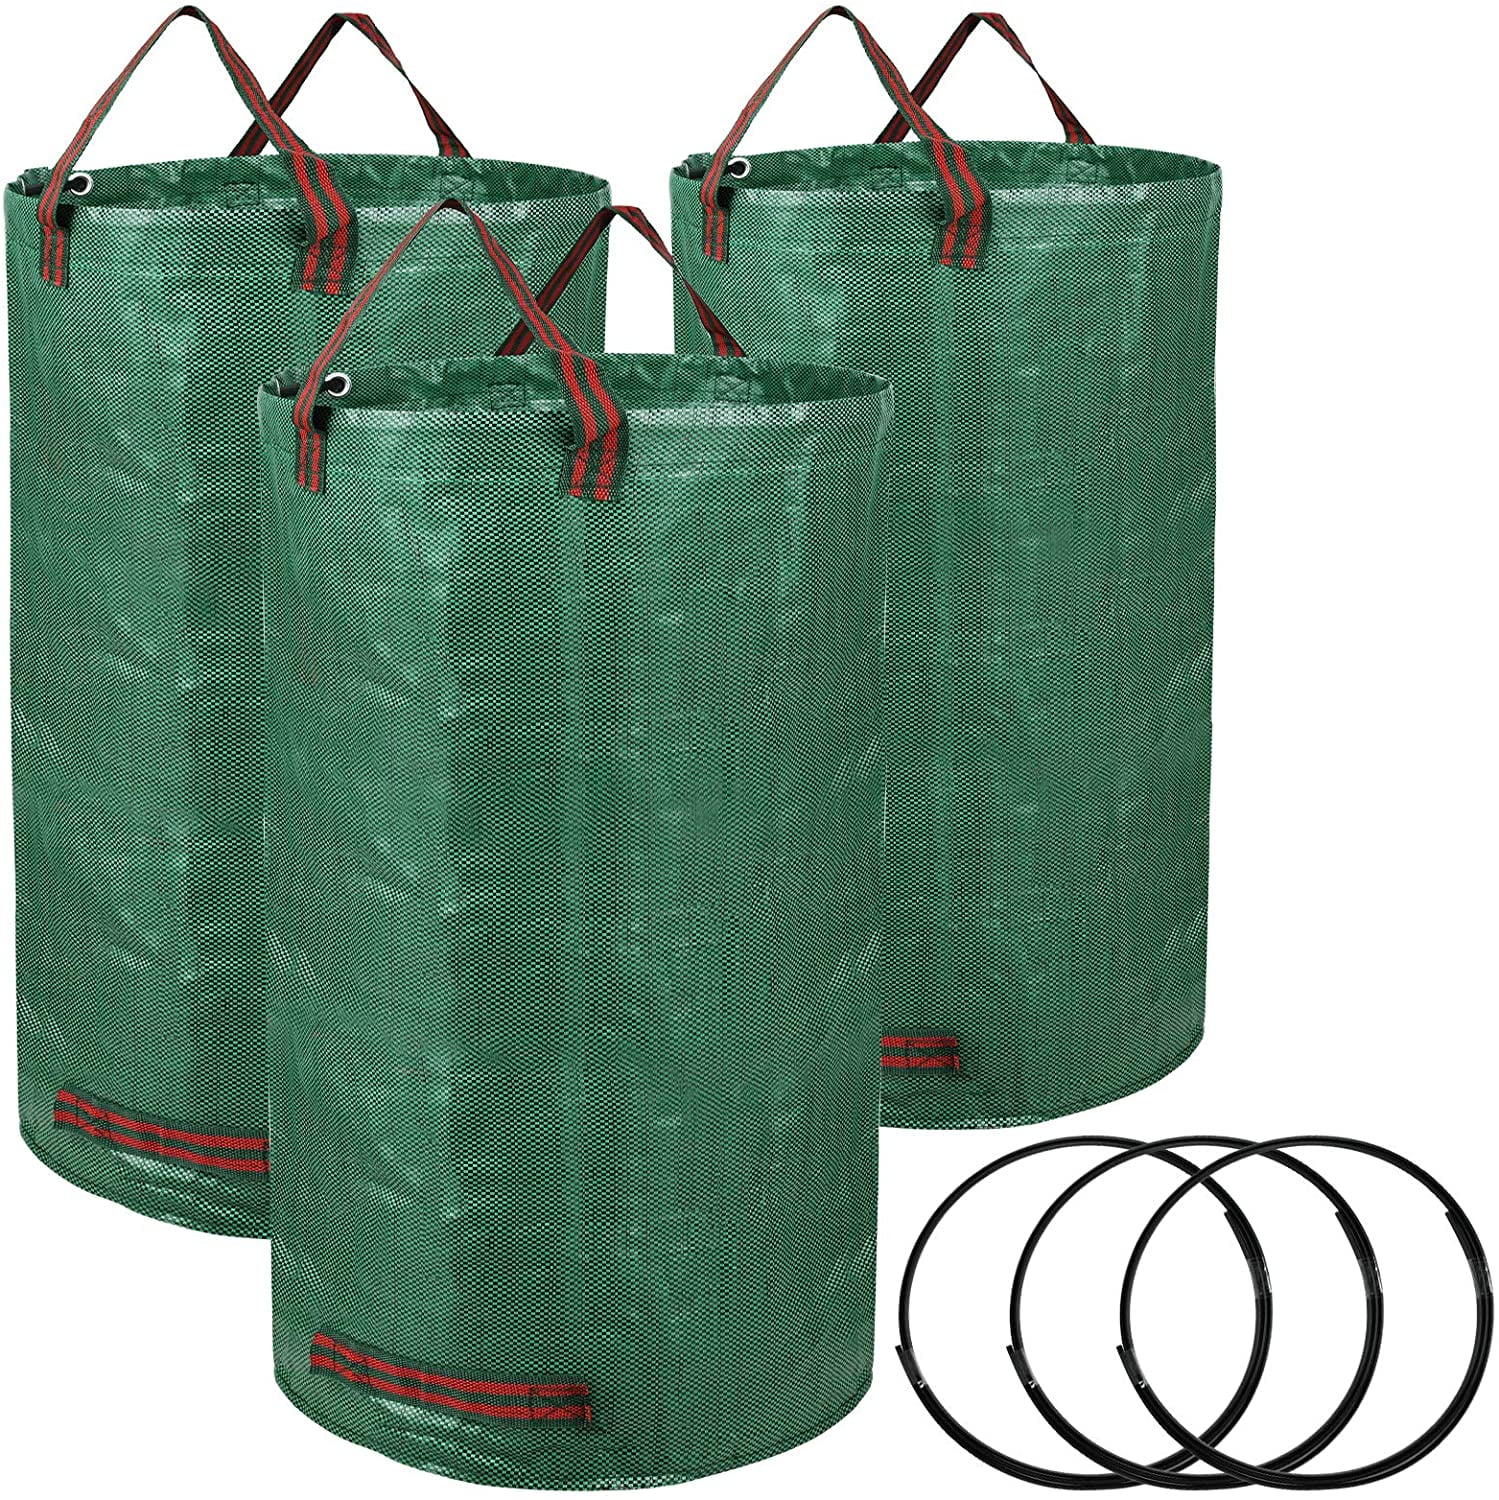 FlowFly Garden Waste Bags Reusable and Collapsible Lawn Leaf Container 3 Pack 72 